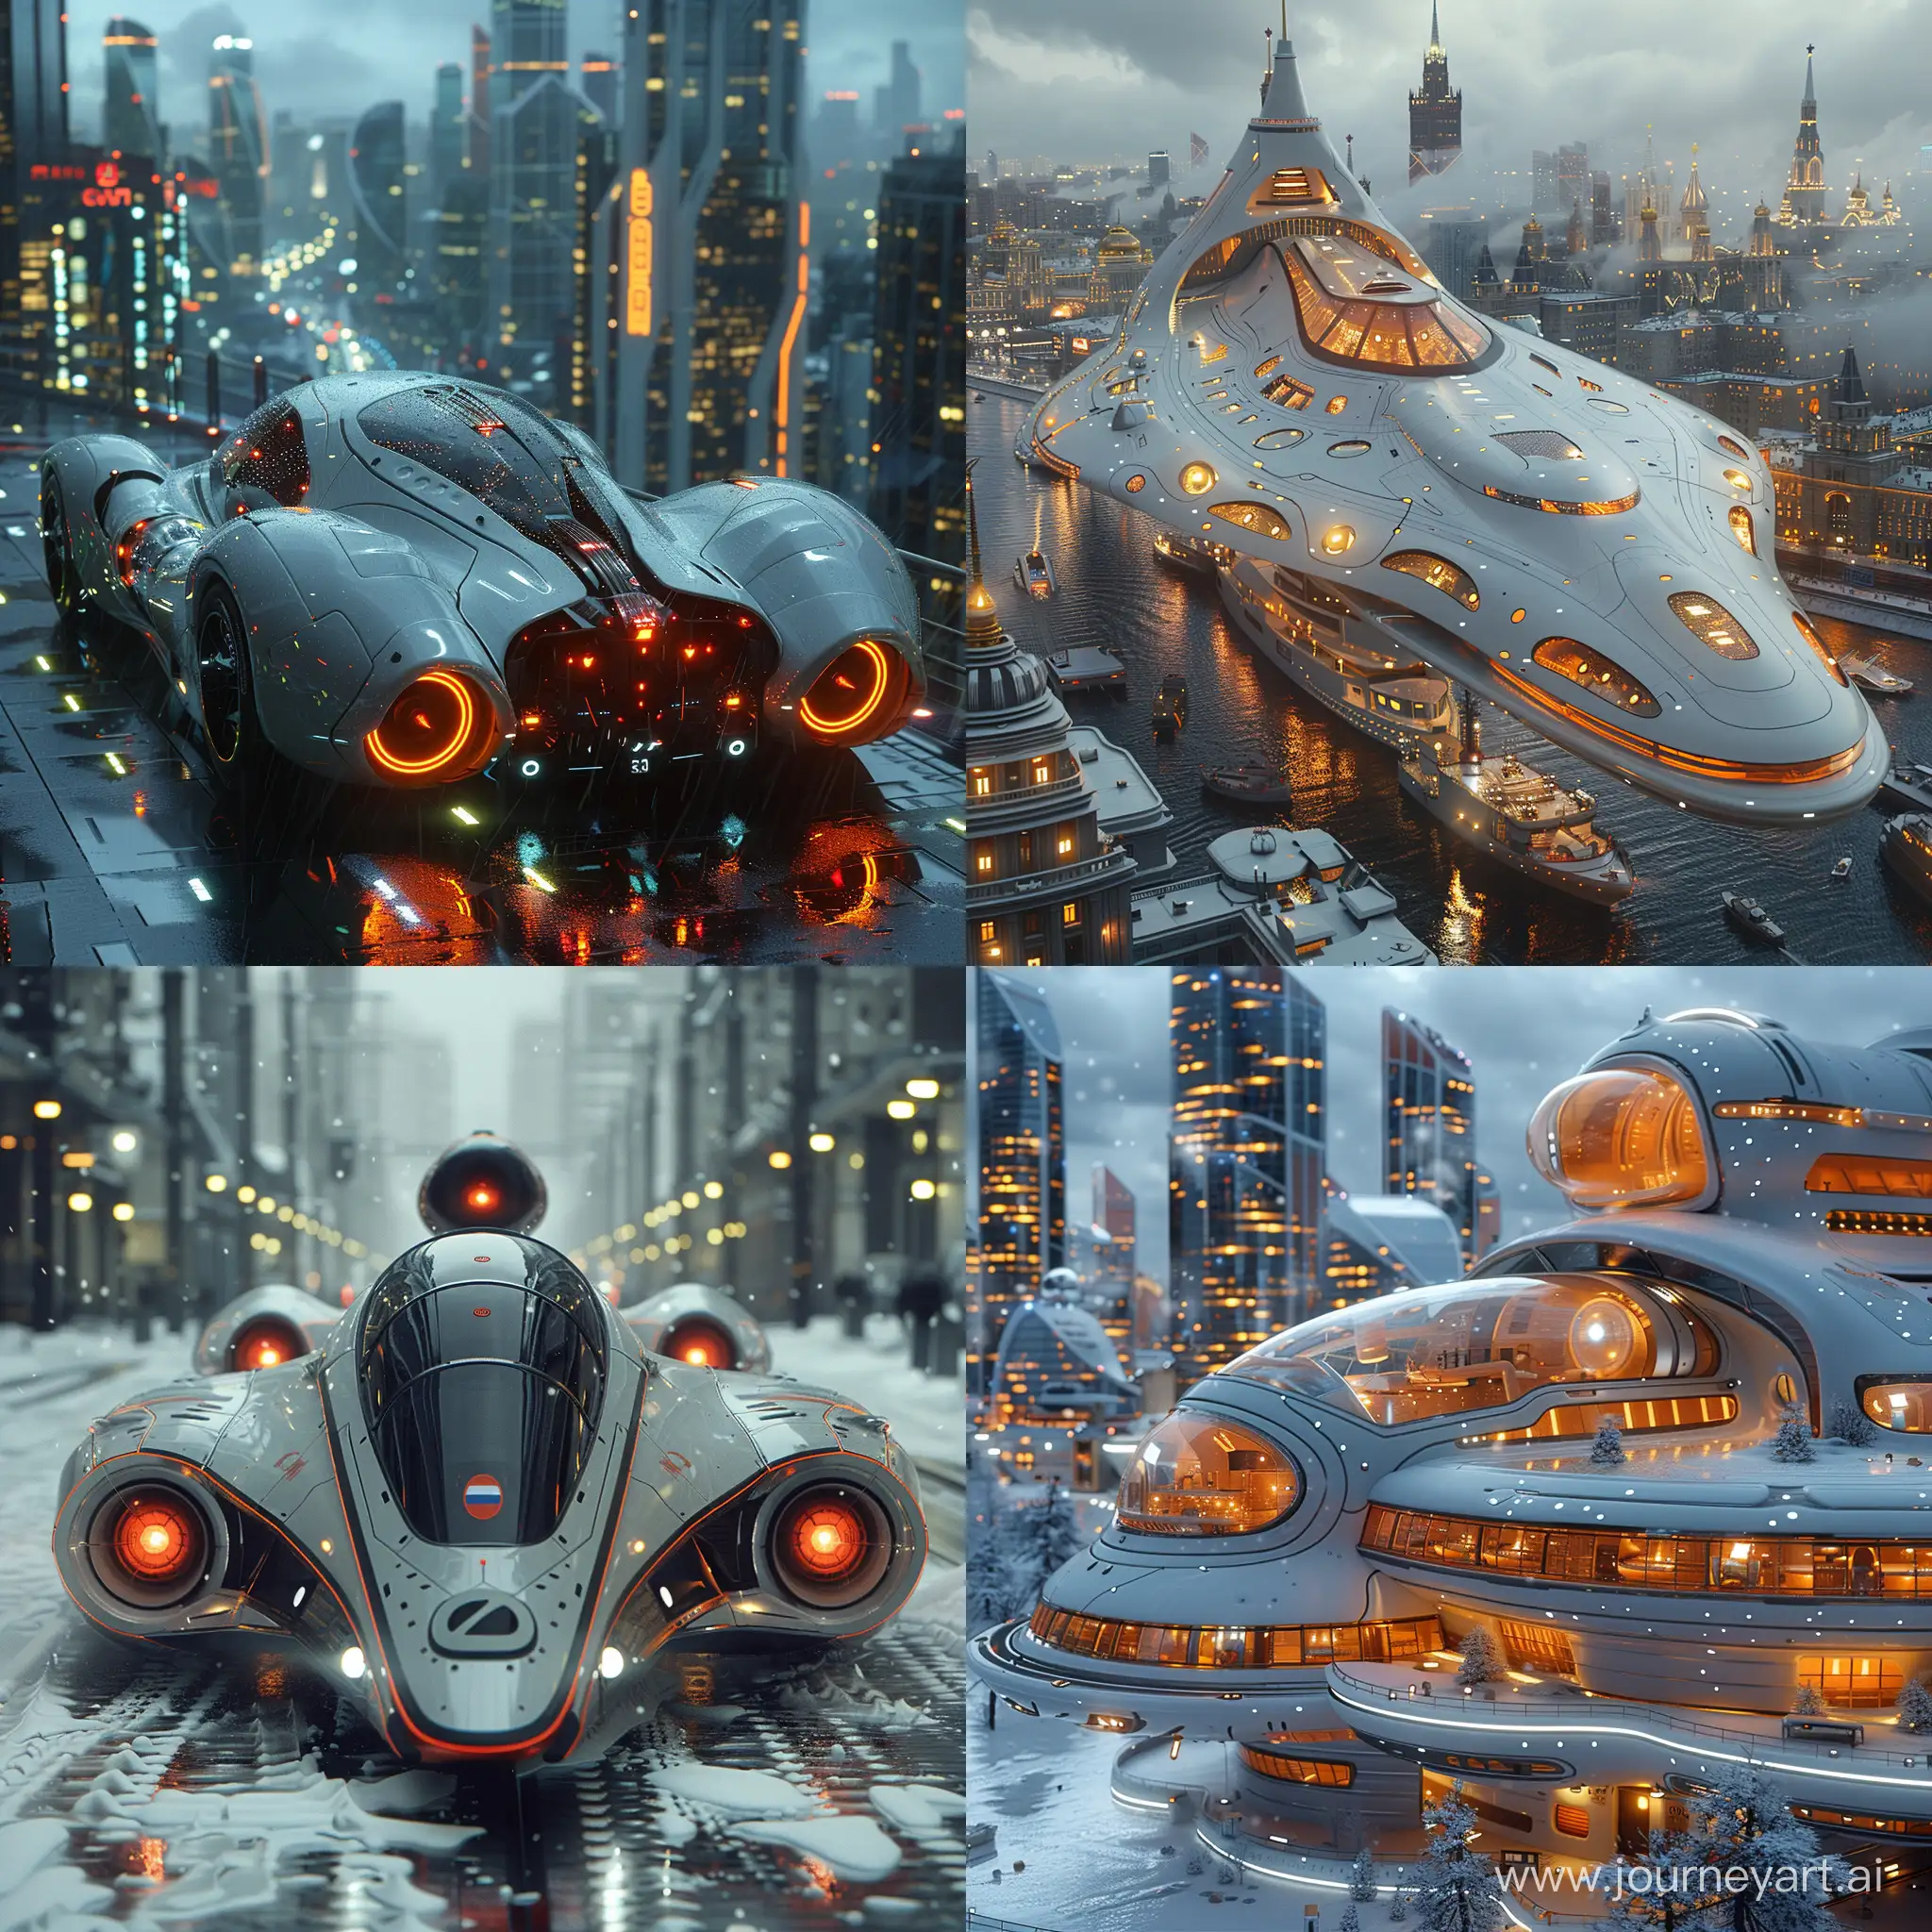 Futuristic-SciFi-Moscow-with-HighTech-Composite-Materials